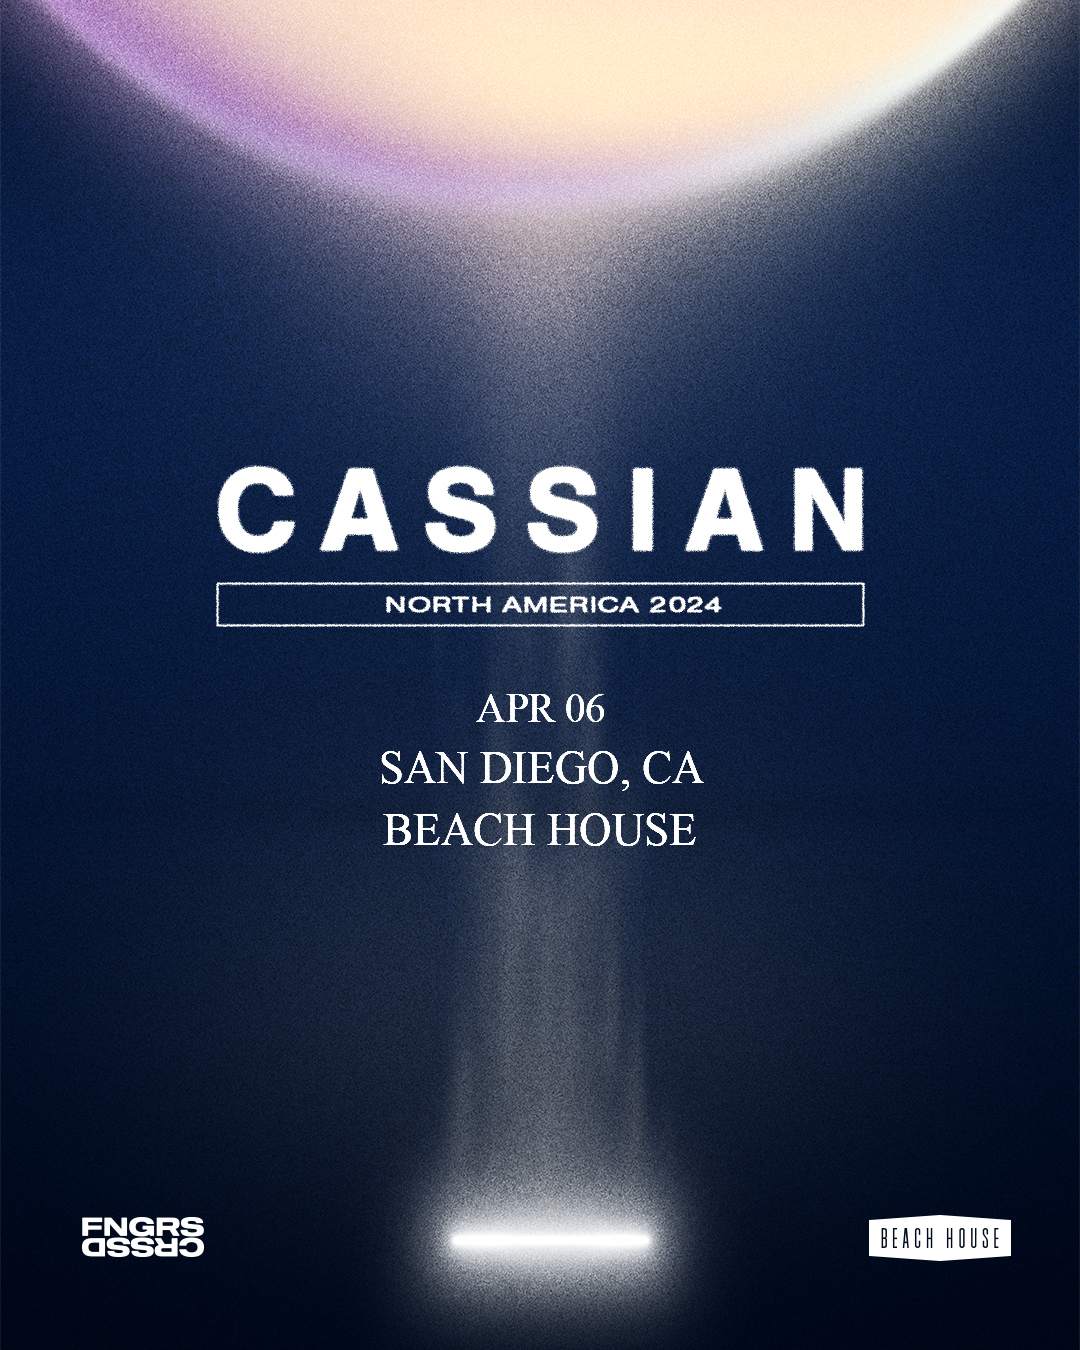 FNGRS CRSSD presents Palms Beach Club with Cassian - Página frontal